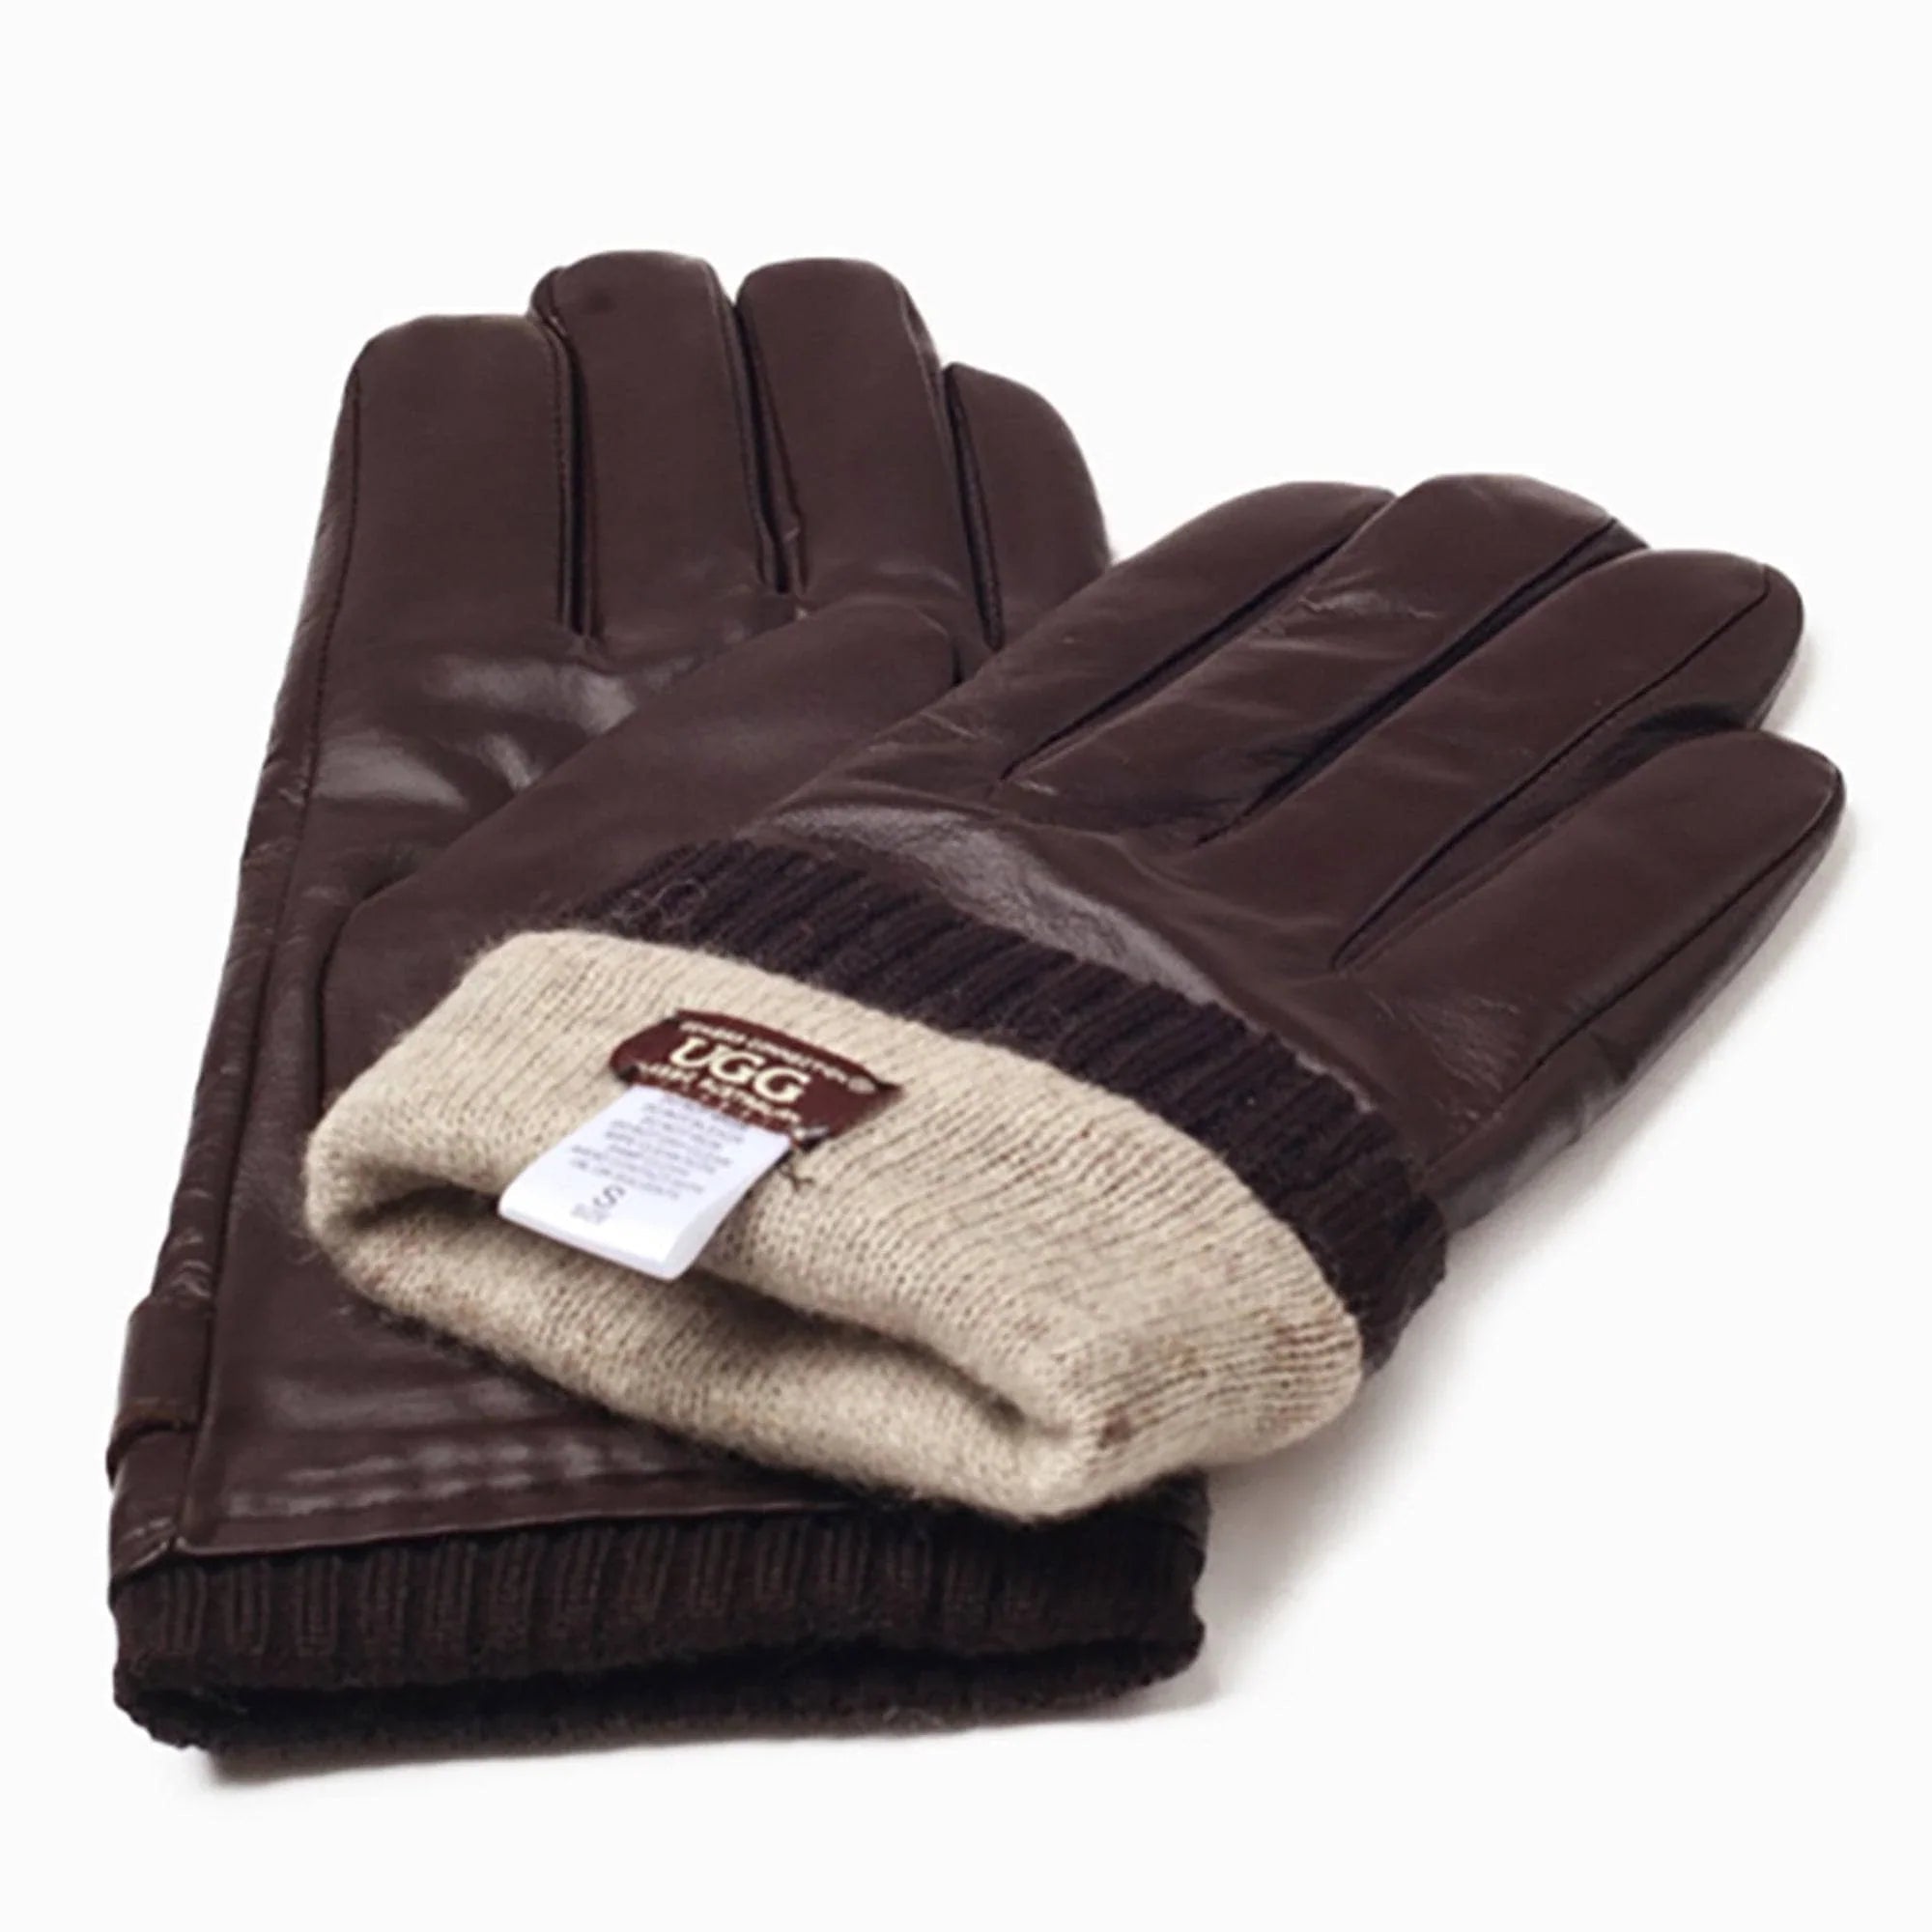 UGG Premium Touch Screen Men's Silver Stud Gloves